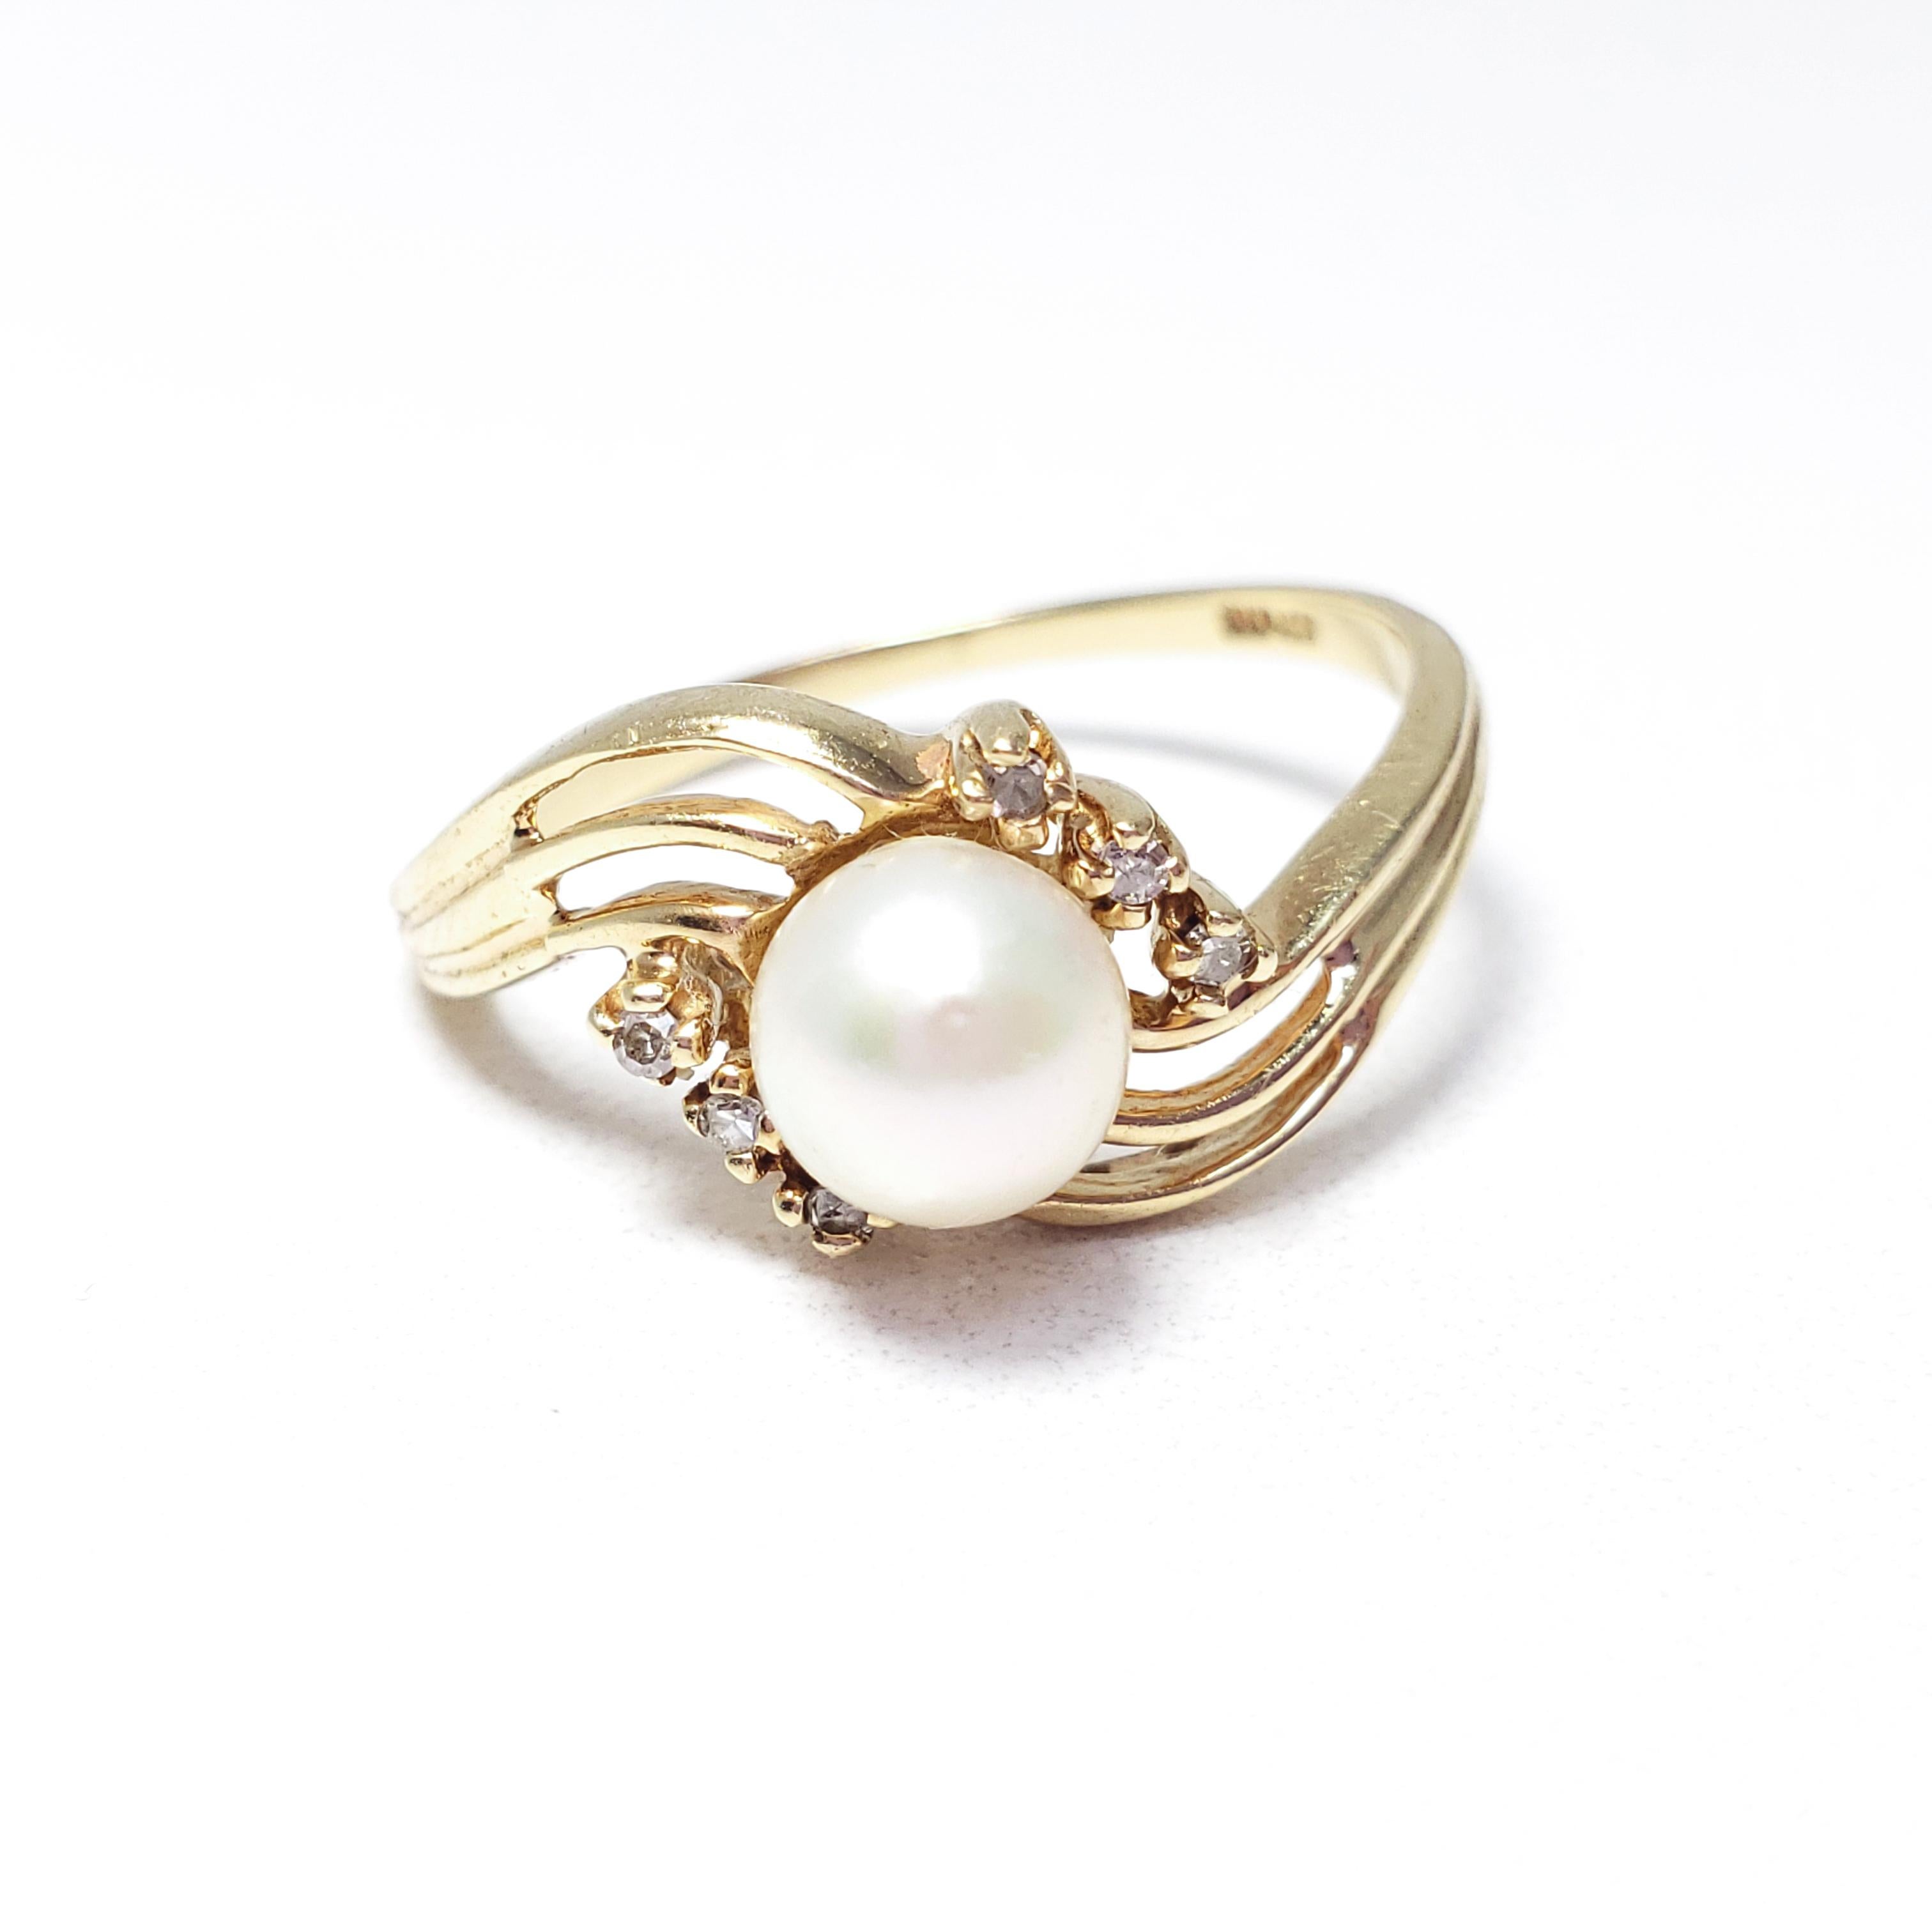 A classy vintage ring with a natural pearl centerpiece, 5.7 mm in diameter, accented with 6 diamonds. Set in a beautifully curved 10K gold band.

Hallmarks: 10KP, CTR

This ring is hallmarked 10KP, which signifies 10K gold plumb. This means it is